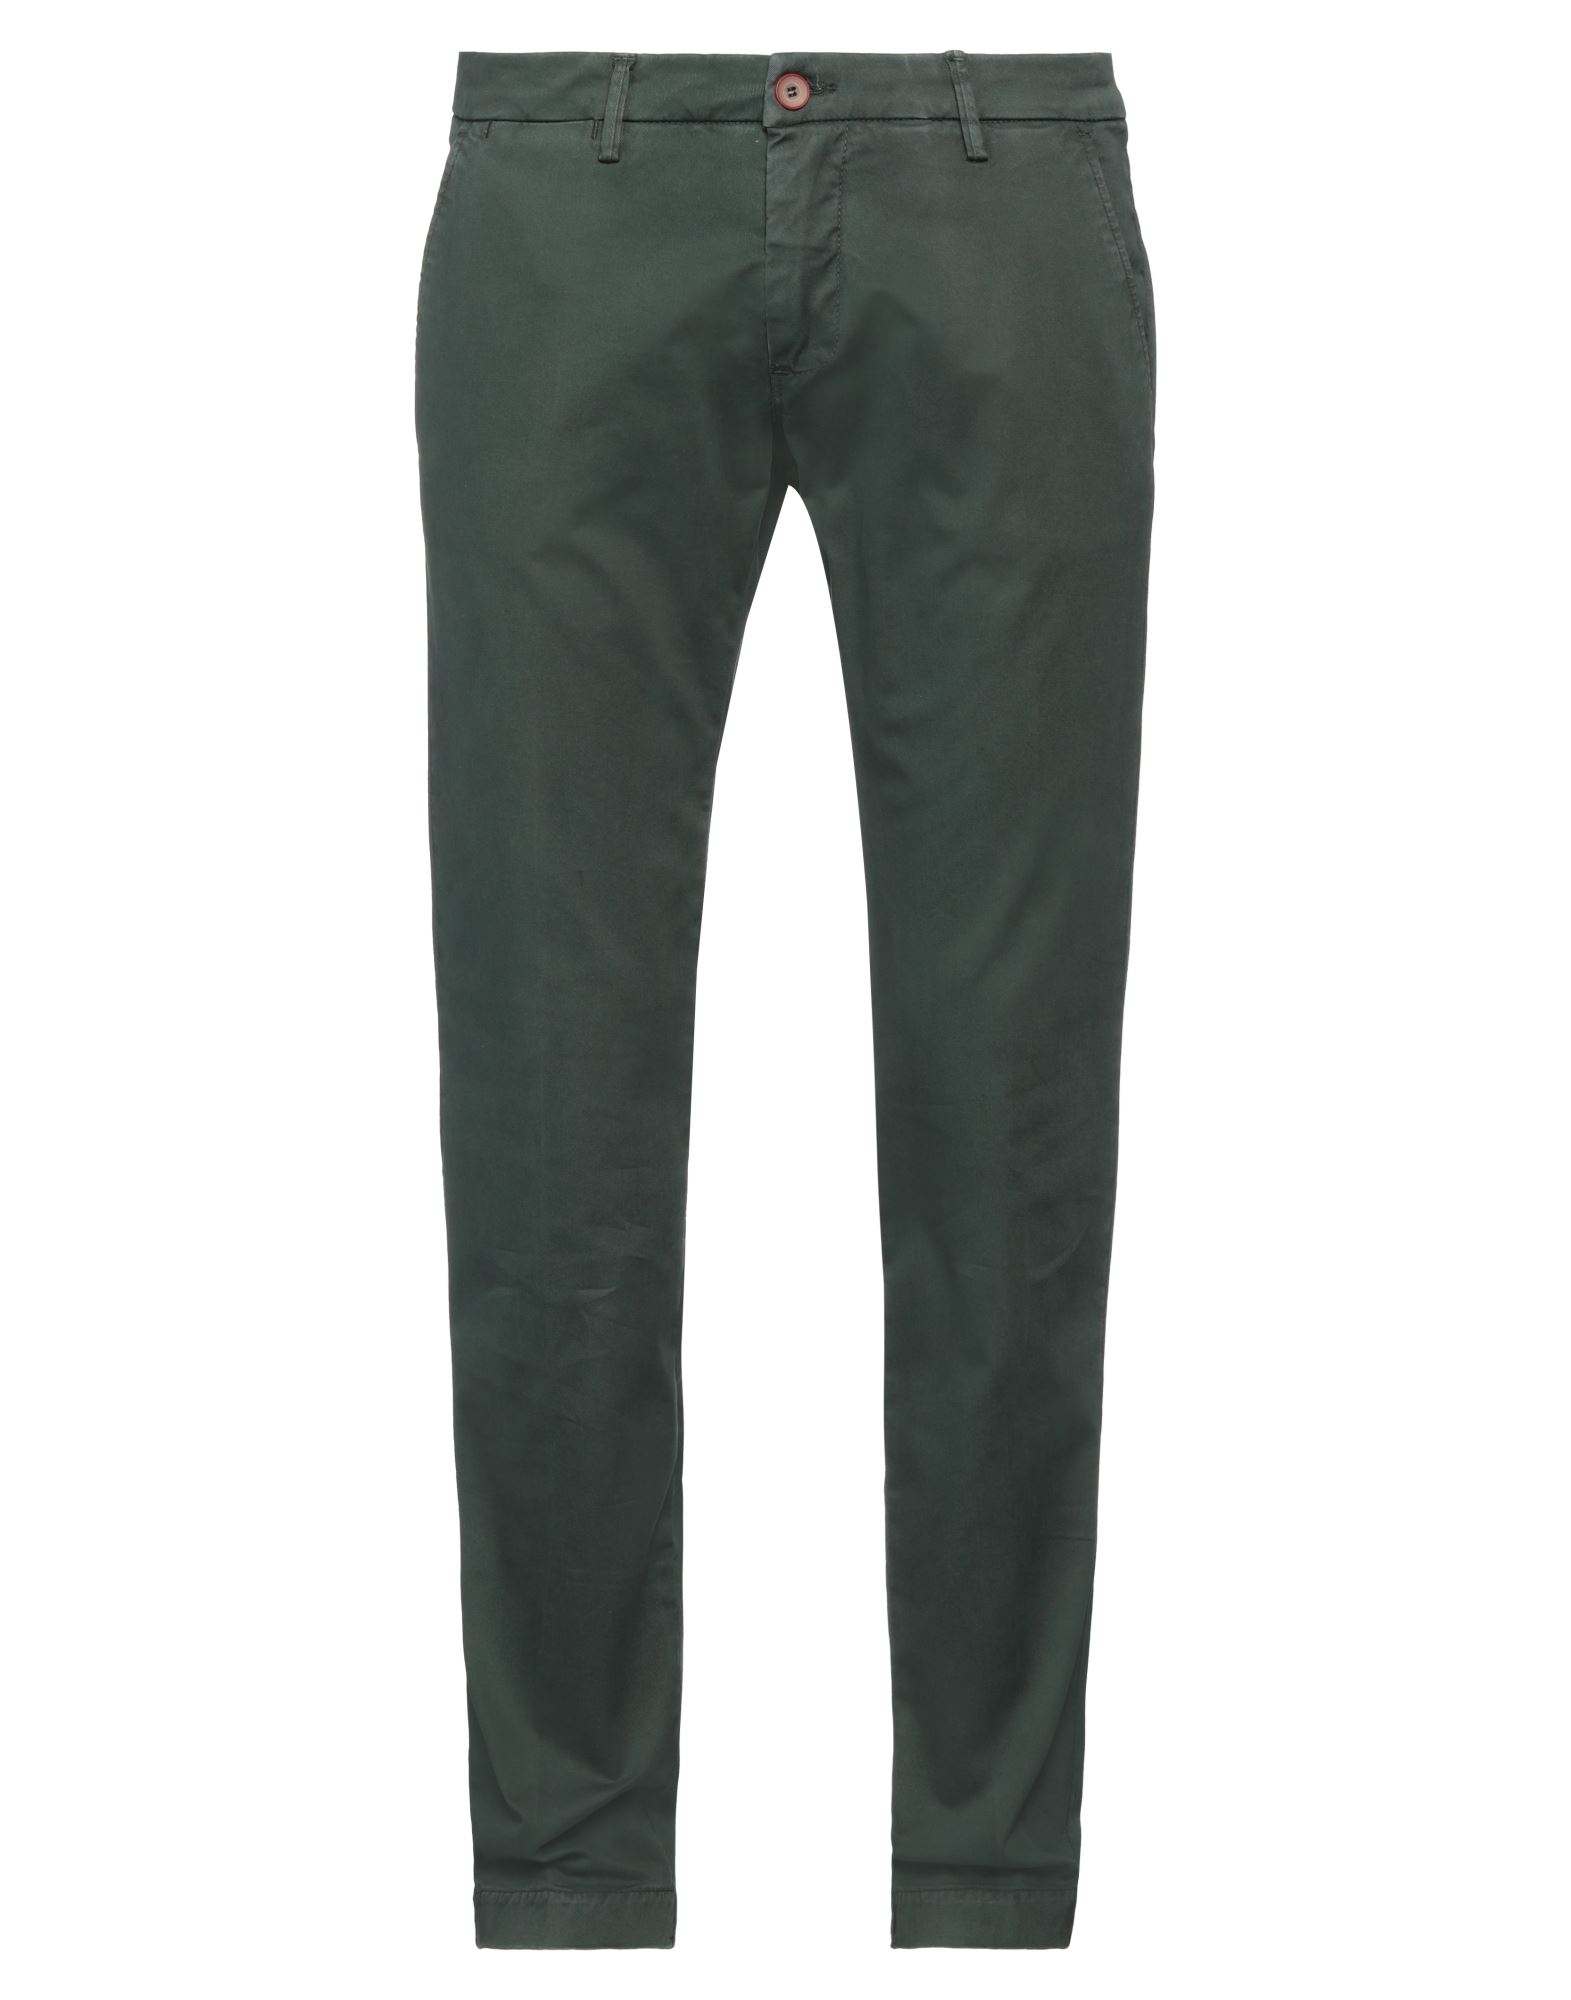 Our Fly Pants In Green